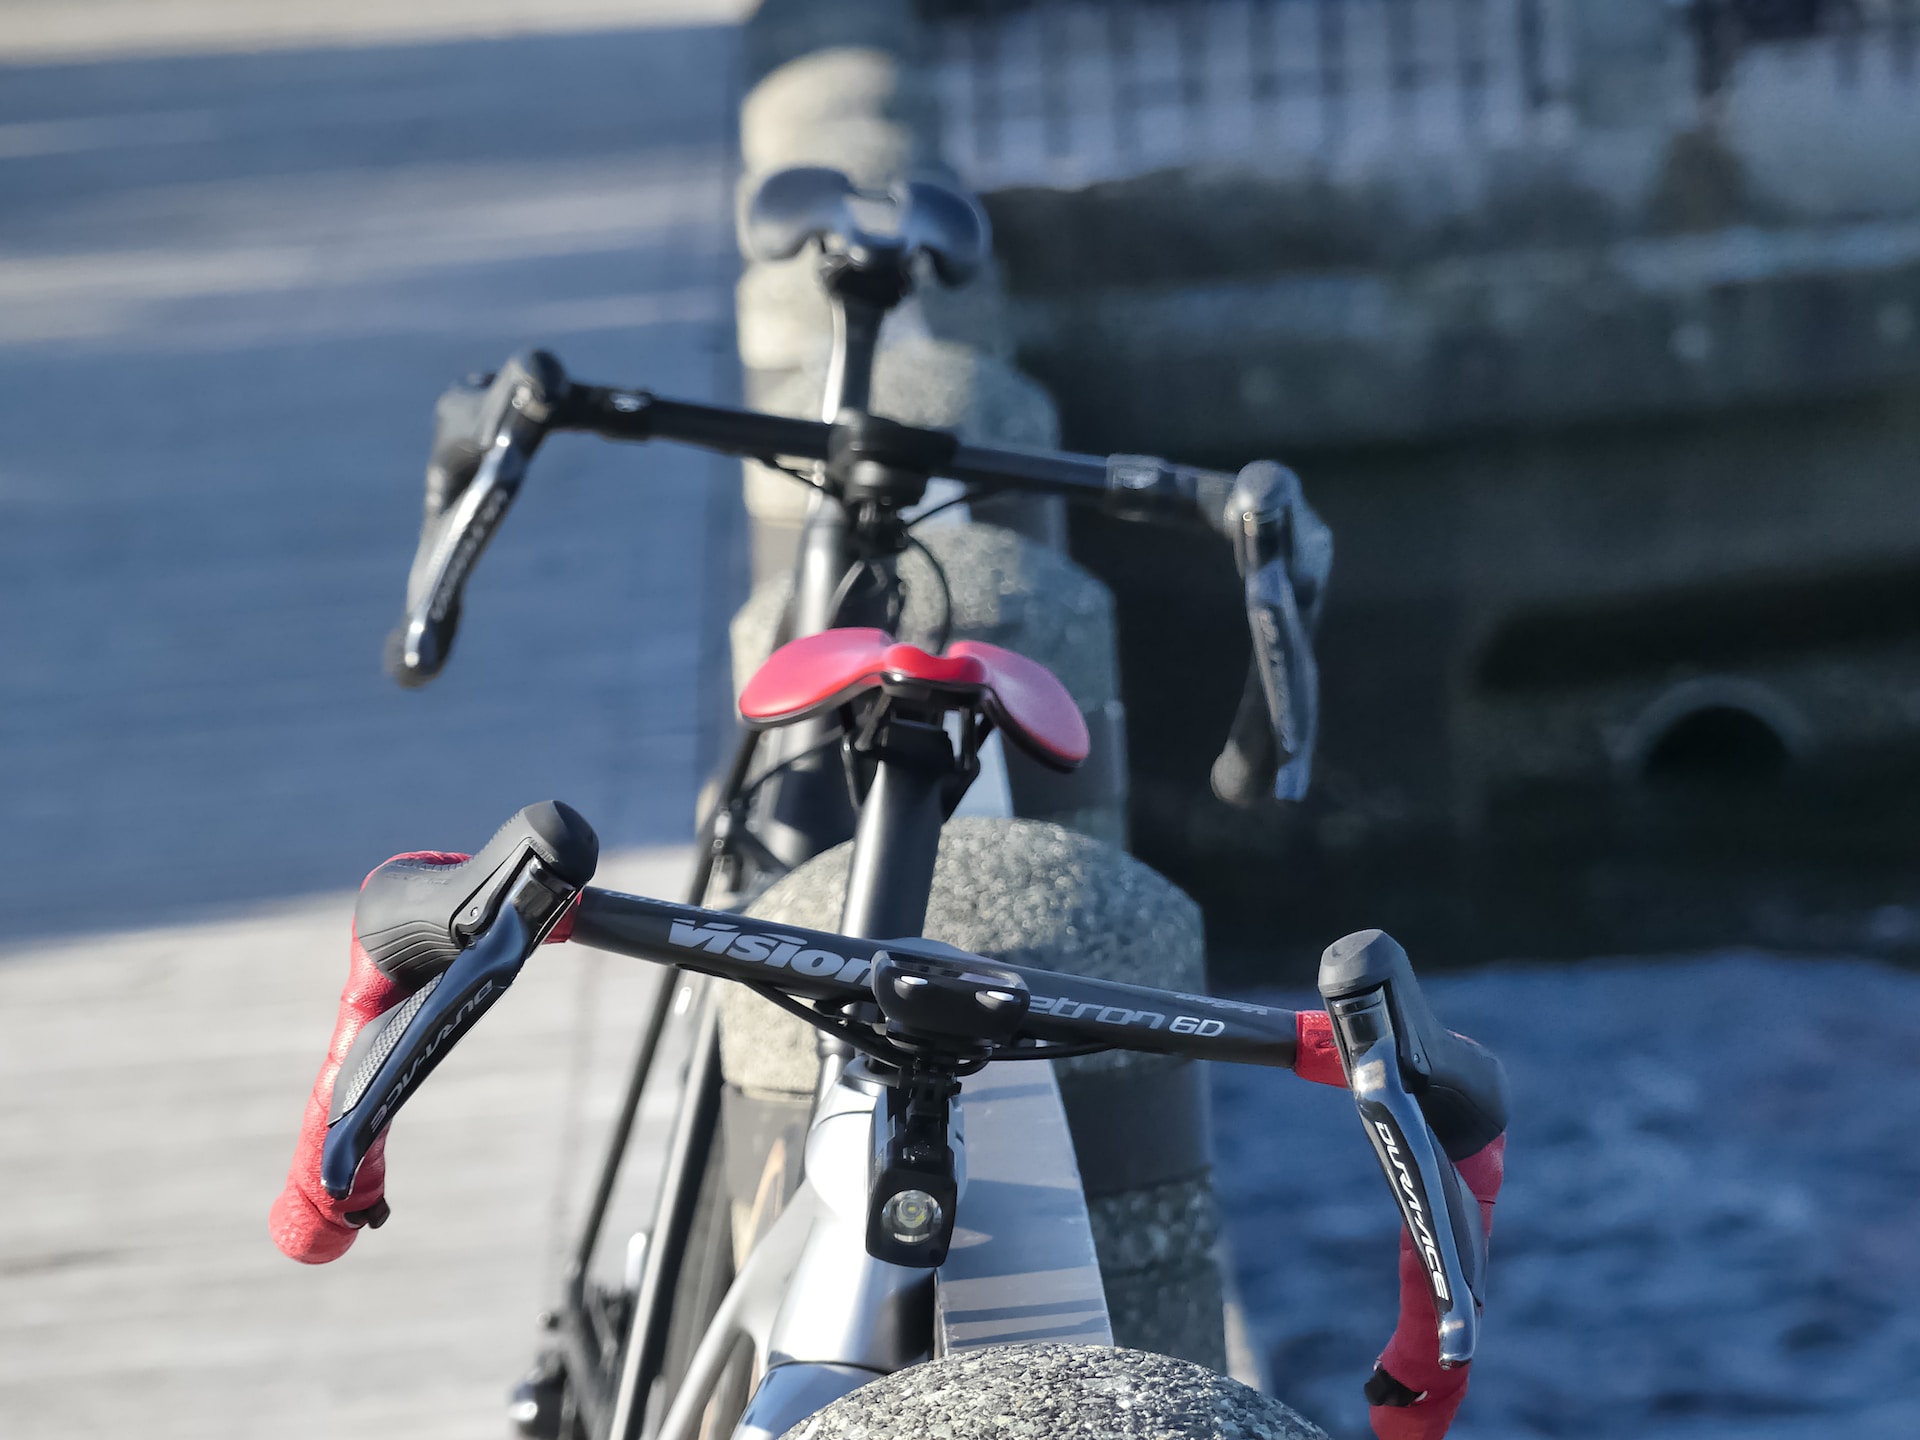 this image shows a bicycle on the quay